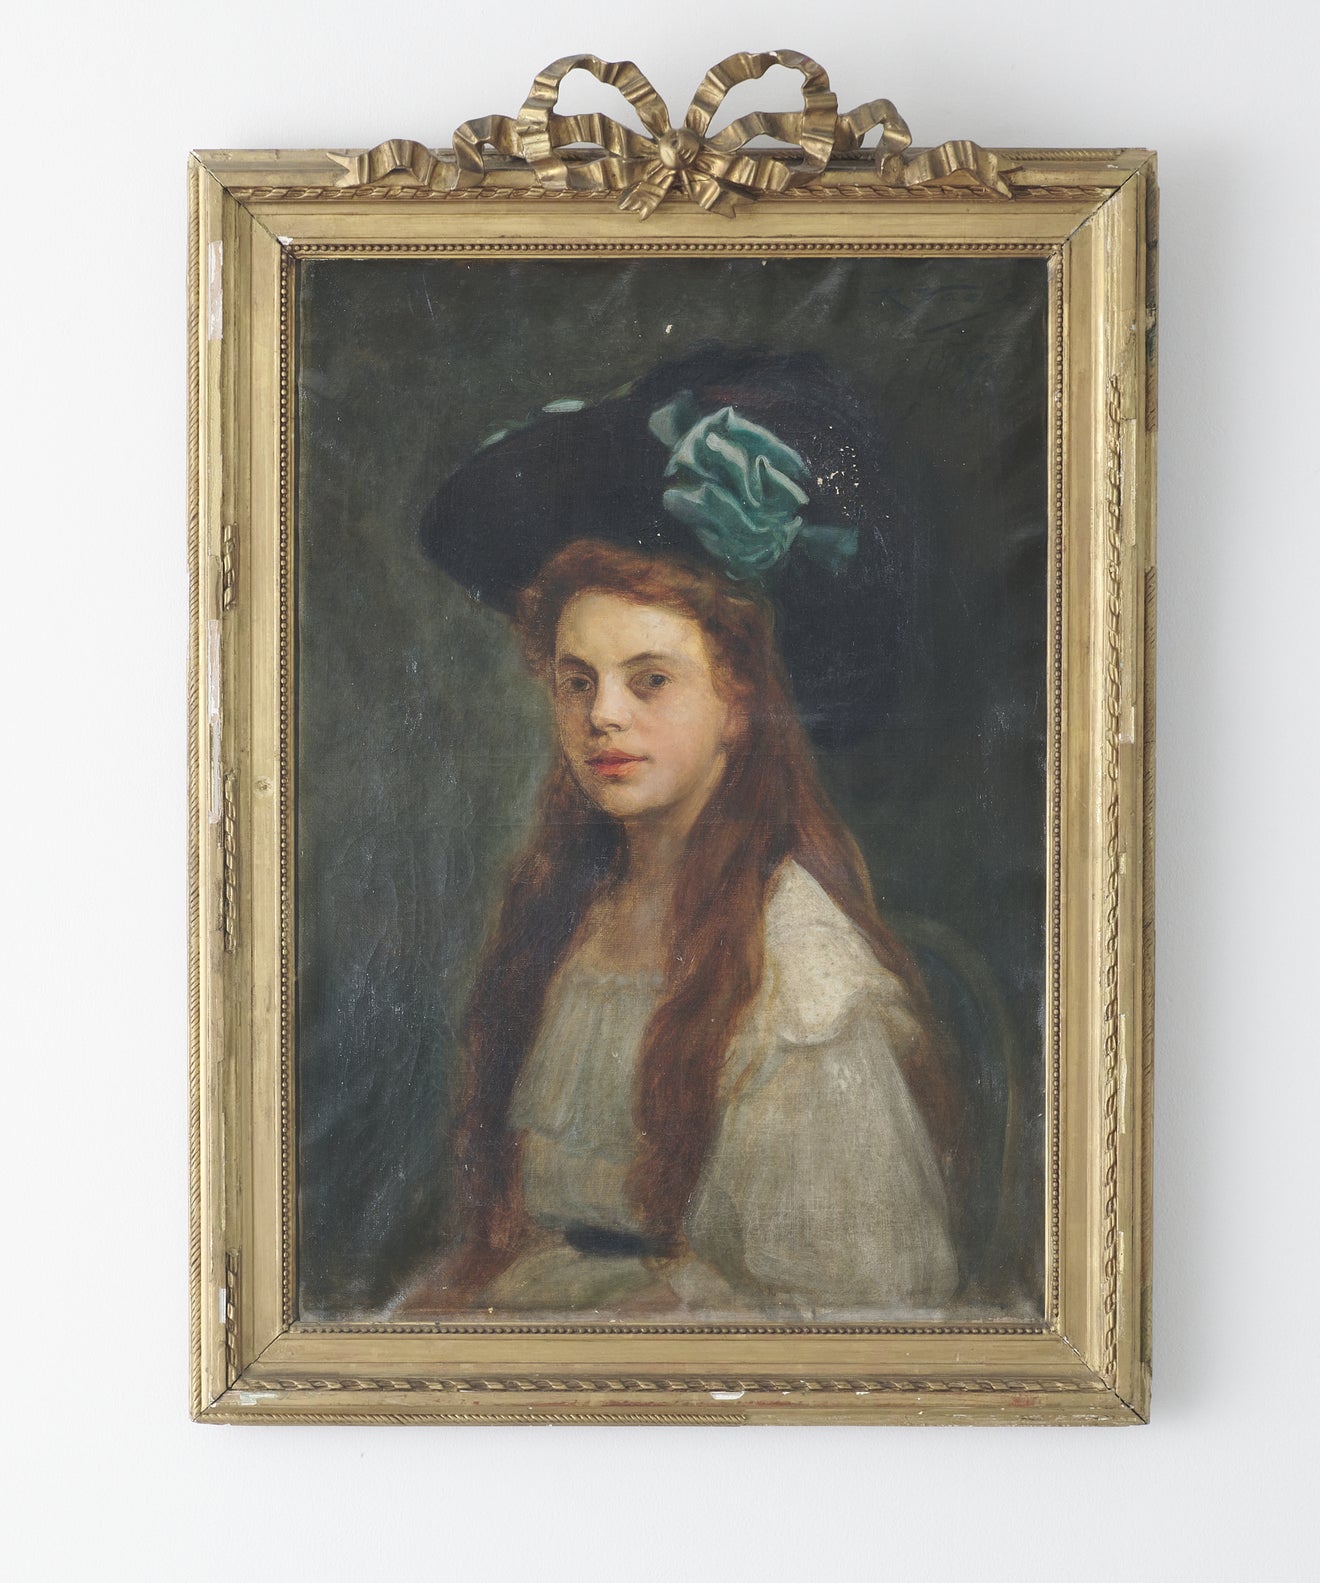 VICTORIAN PORTRAIT PAINTING OF A YOUNG WOMAN